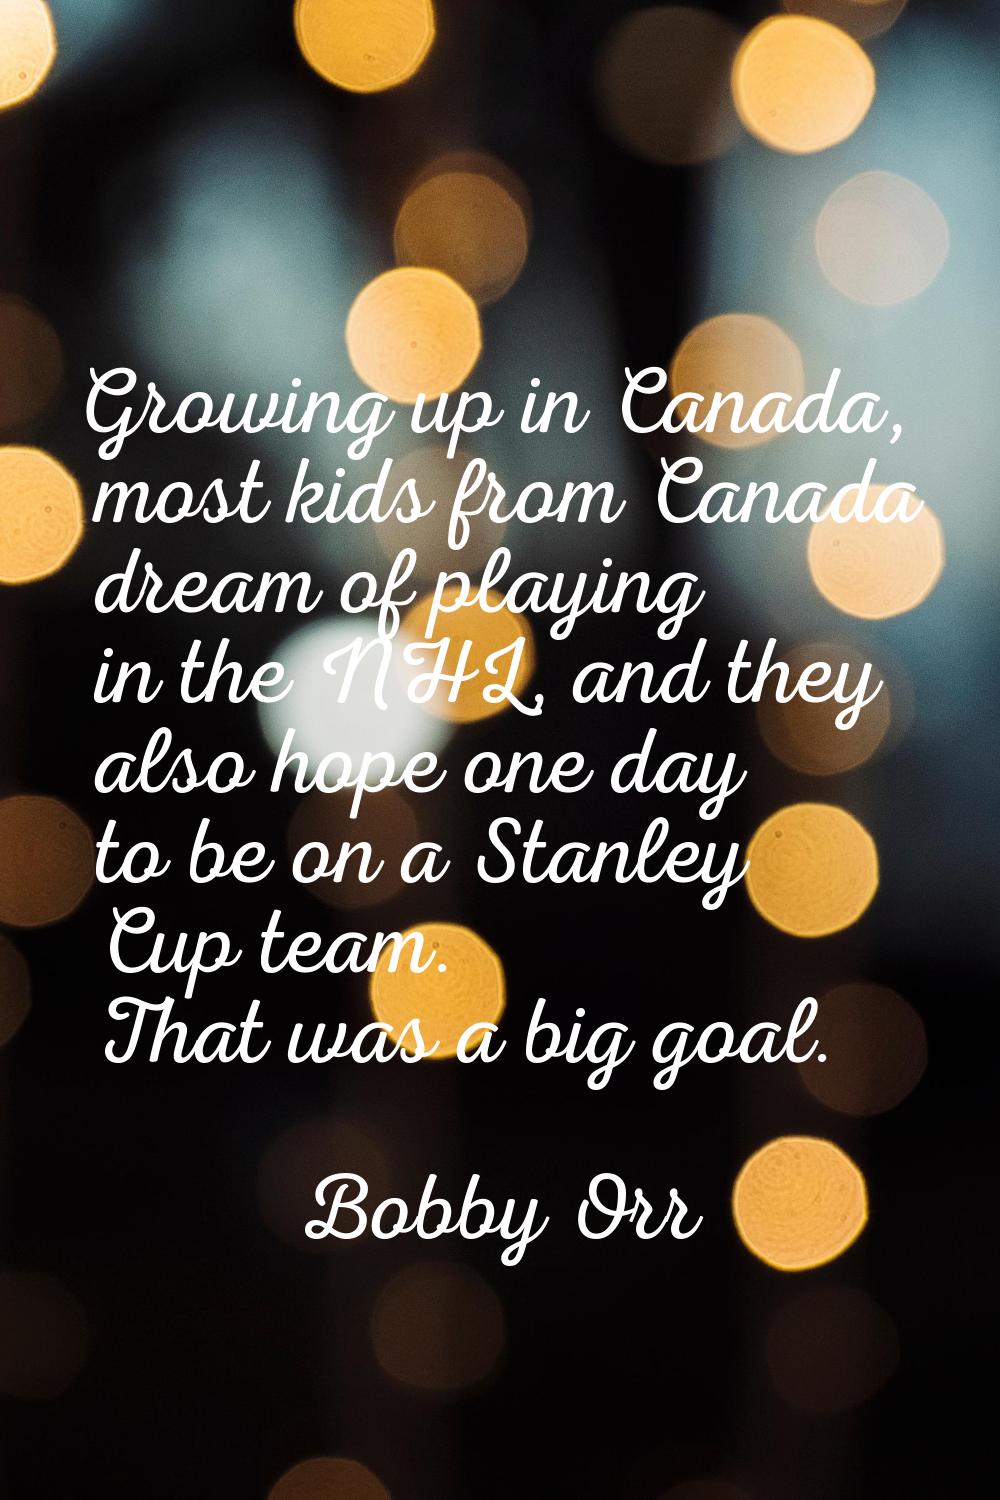 Growing up in Canada, most kids from Canada dream of playing in the NHL, and they also hope one day